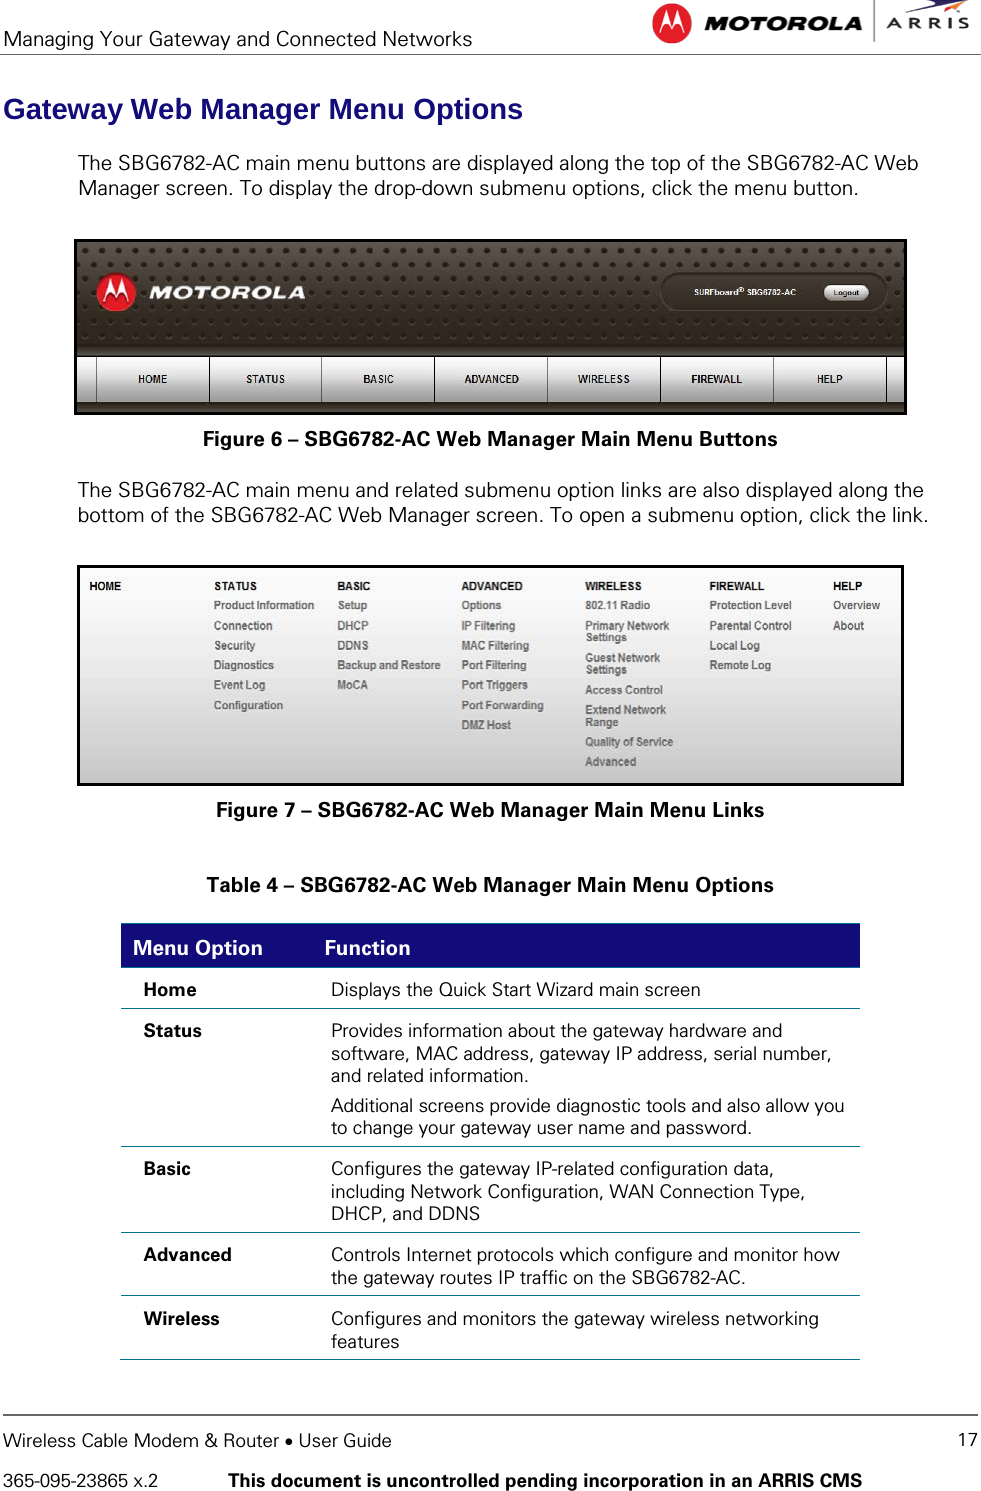 Managing Your Gateway and Connected Networks   Wireless Cable Modem &amp; Router • User Guide 17 365-095-23865 x.2   This document is uncontrolled pending incorporation in an ARRIS CMS  Gateway Web Manager Menu Options The SBG6782-AC main menu buttons are displayed along the top of the SBG6782-AC Web Manager screen. To display the drop-down submenu options, click the menu button.  Figure 6 – SBG6782-AC Web Manager Main Menu Buttons The SBG6782-AC main menu and related submenu option links are also displayed along the bottom of the SBG6782-AC Web Manager screen. To open a submenu option, click the link.  Figure 7 – SBG6782-AC Web Manager Main Menu Links  Table 4 – SBG6782-AC Web Manager Main Menu Options Menu Option Function Home Displays the Quick Start Wizard main screen Status Provides information about the gateway hardware and software, MAC address, gateway IP address, serial number, and related information. Additional screens provide diagnostic tools and also allow you to change your gateway user name and password. Basic  Configures the gateway IP-related configuration data, including Network Configuration, WAN Connection Type, DHCP, and DDNS  Advanced Controls Internet protocols which configure and monitor how the gateway routes IP traffic on the SBG6782-AC. Wireless Configures and monitors the gateway wireless networking features 